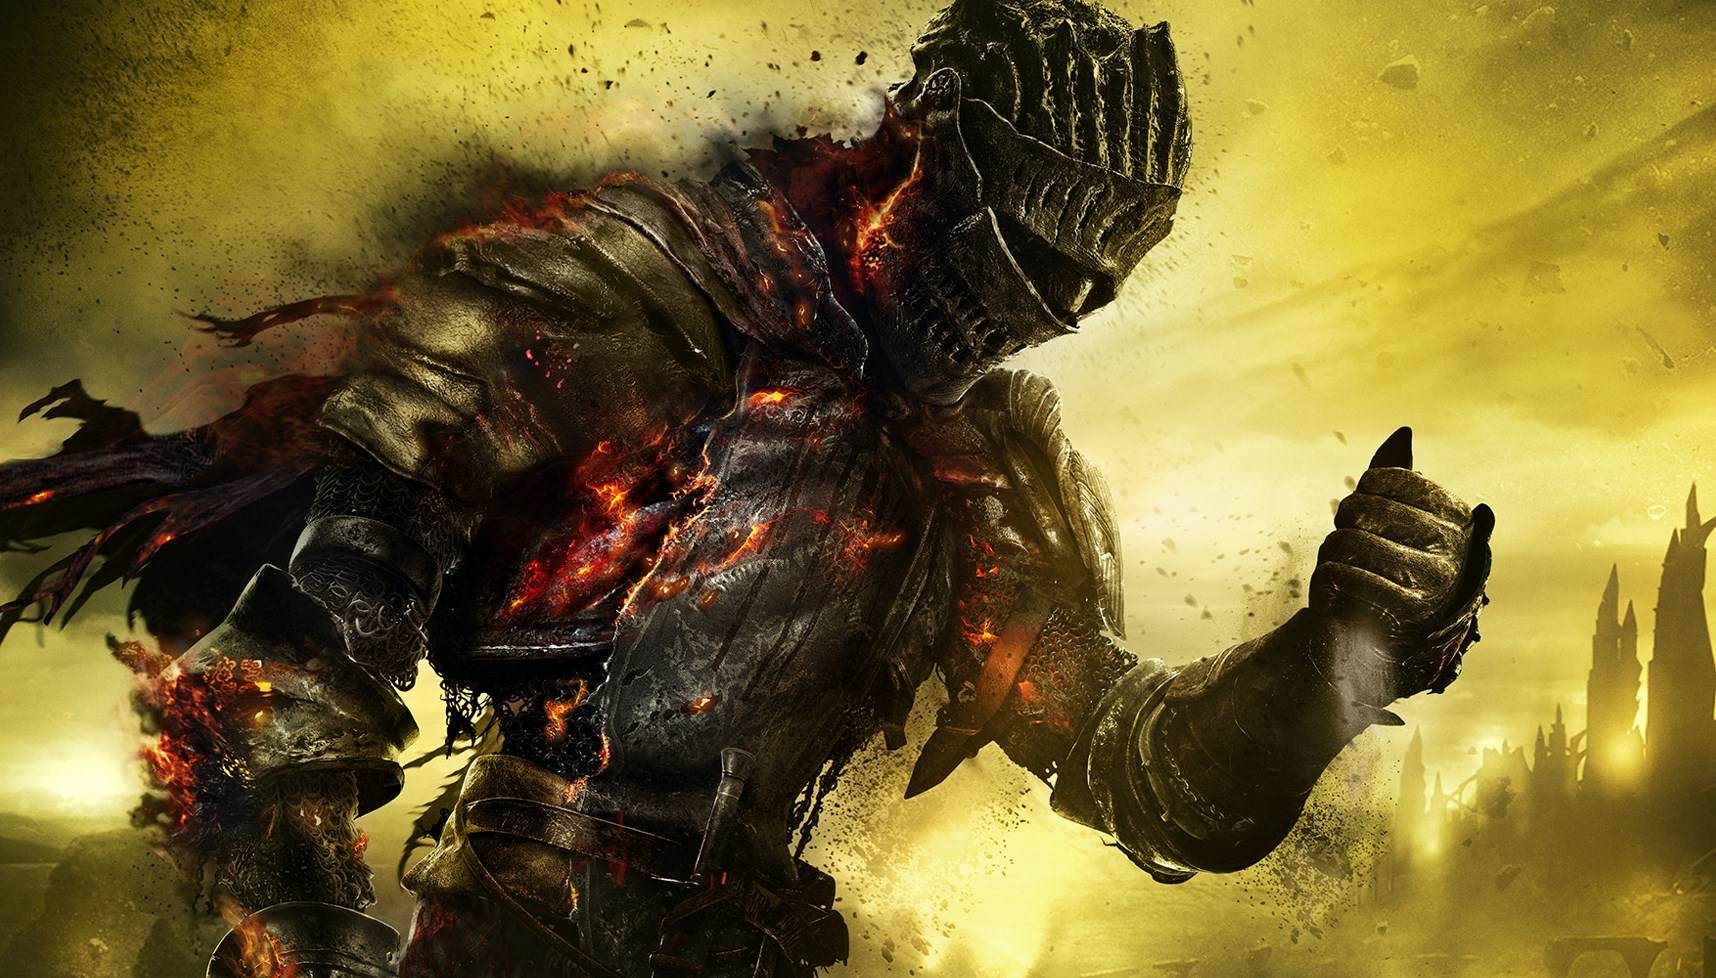  While Elden Ring thrives, the PC Souls games have been offline for 103 days 